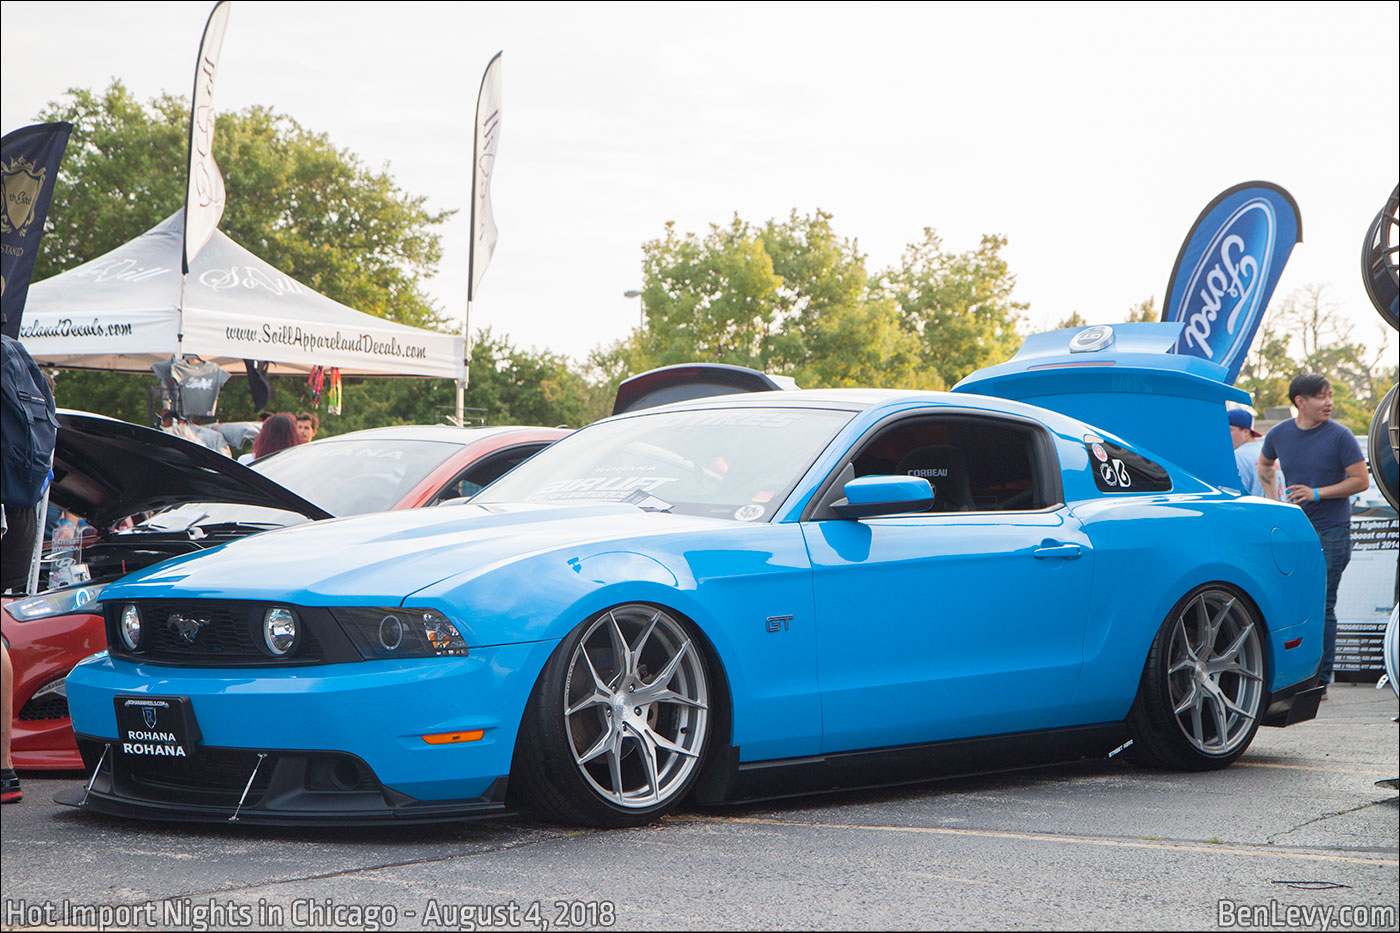 Blue Ford Mustang GT